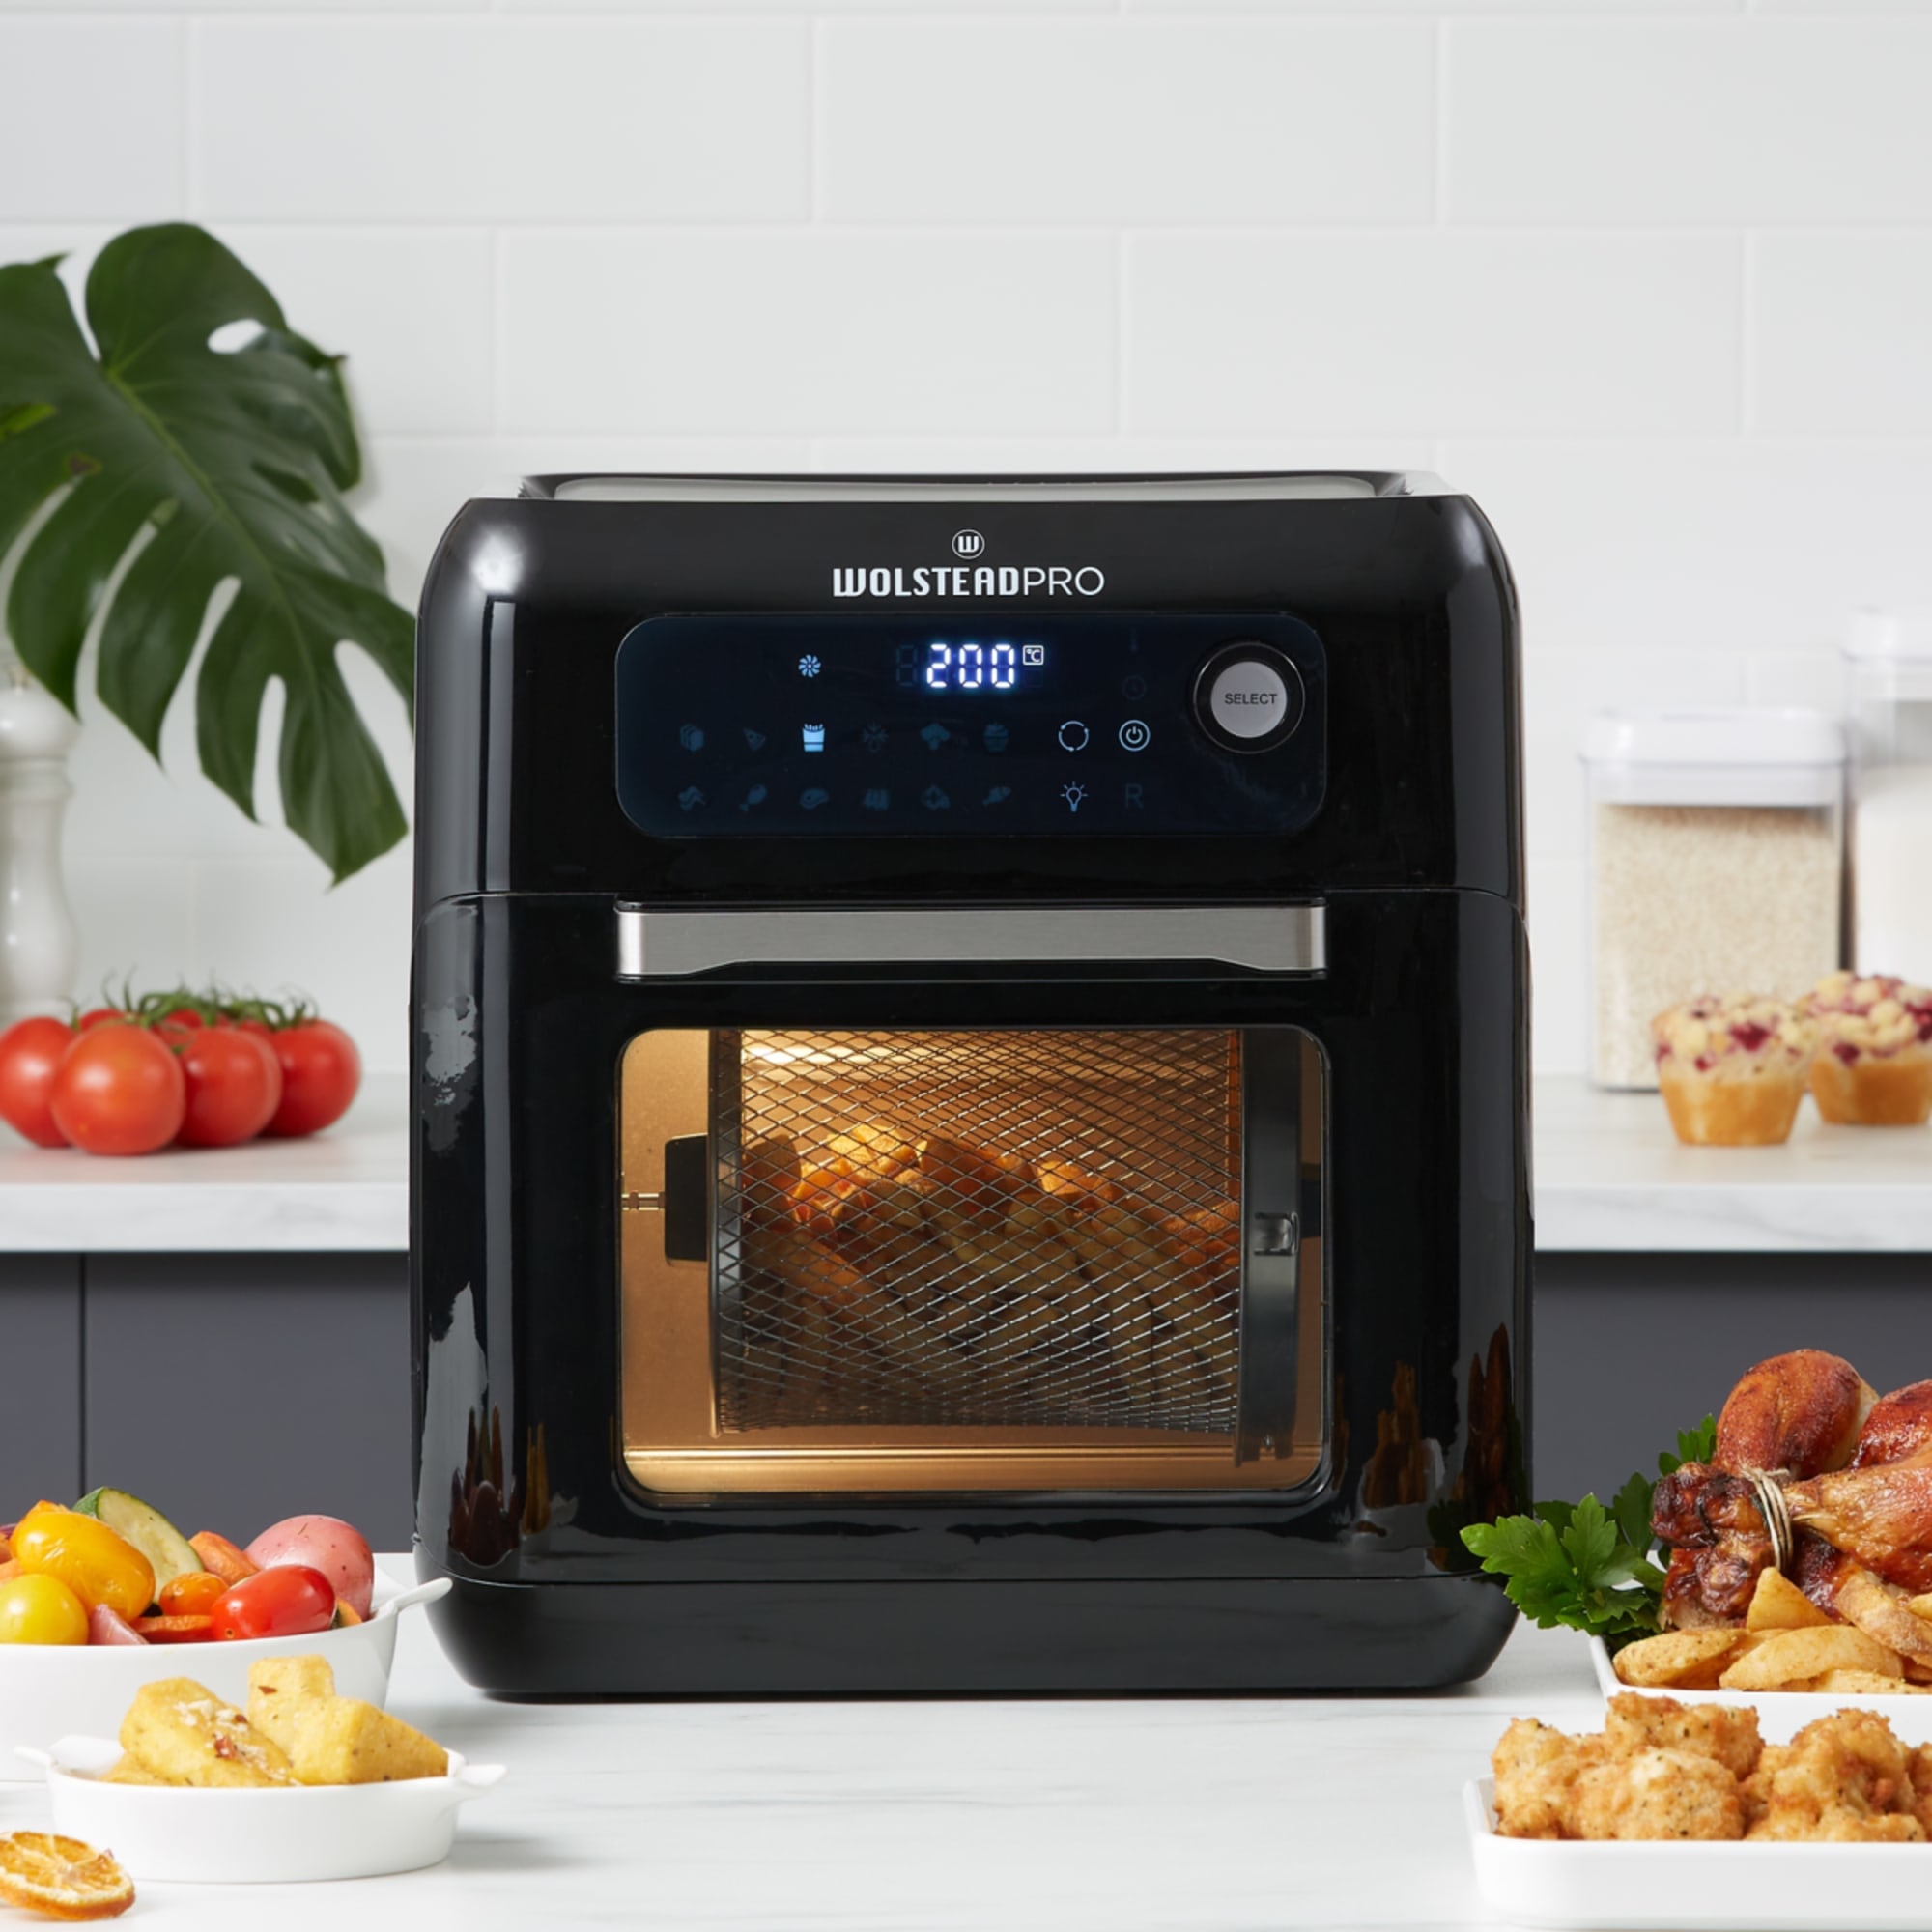 https://res.cloudinary.com/kitchenwarehouse/image/upload/c_fill,g_face,w_1250/f_auto/t_PDP_2000x2000/Kitchen%20Warehouse%20Images%20/Wolstead-Pro-Swift-Digital-Air-Fryer-Oven-12L-Black-LS_1_bgb59w.jpg